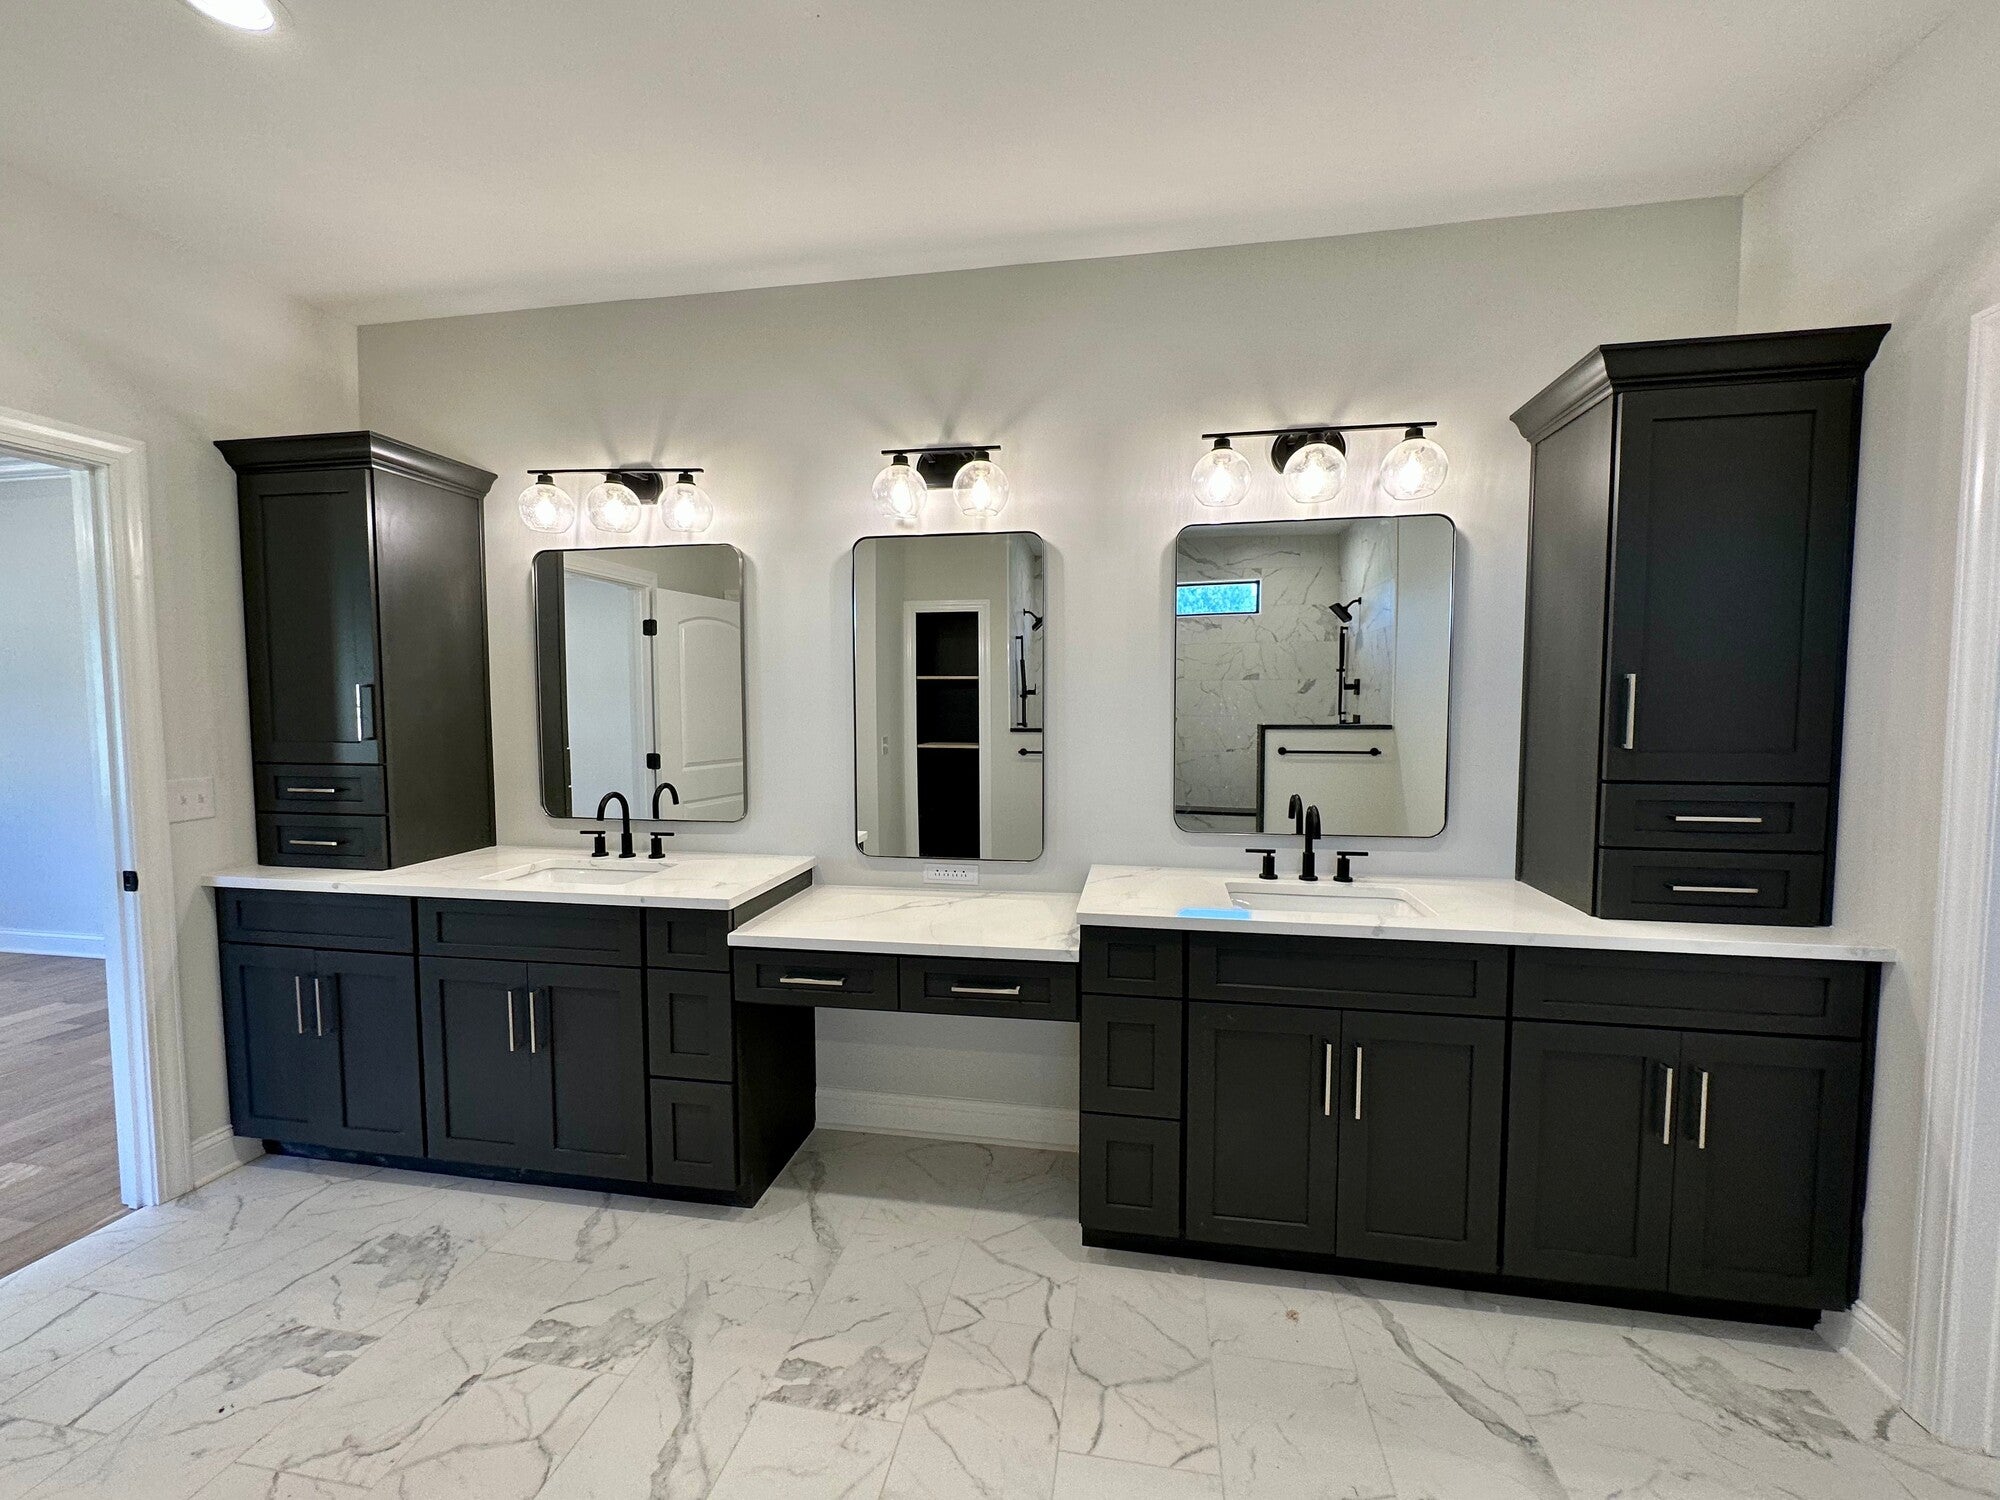 Modern bathroom with black cabinets, white countertops, dual sinks, three mirrors, and globe light fixtures highlighting the marble floor.